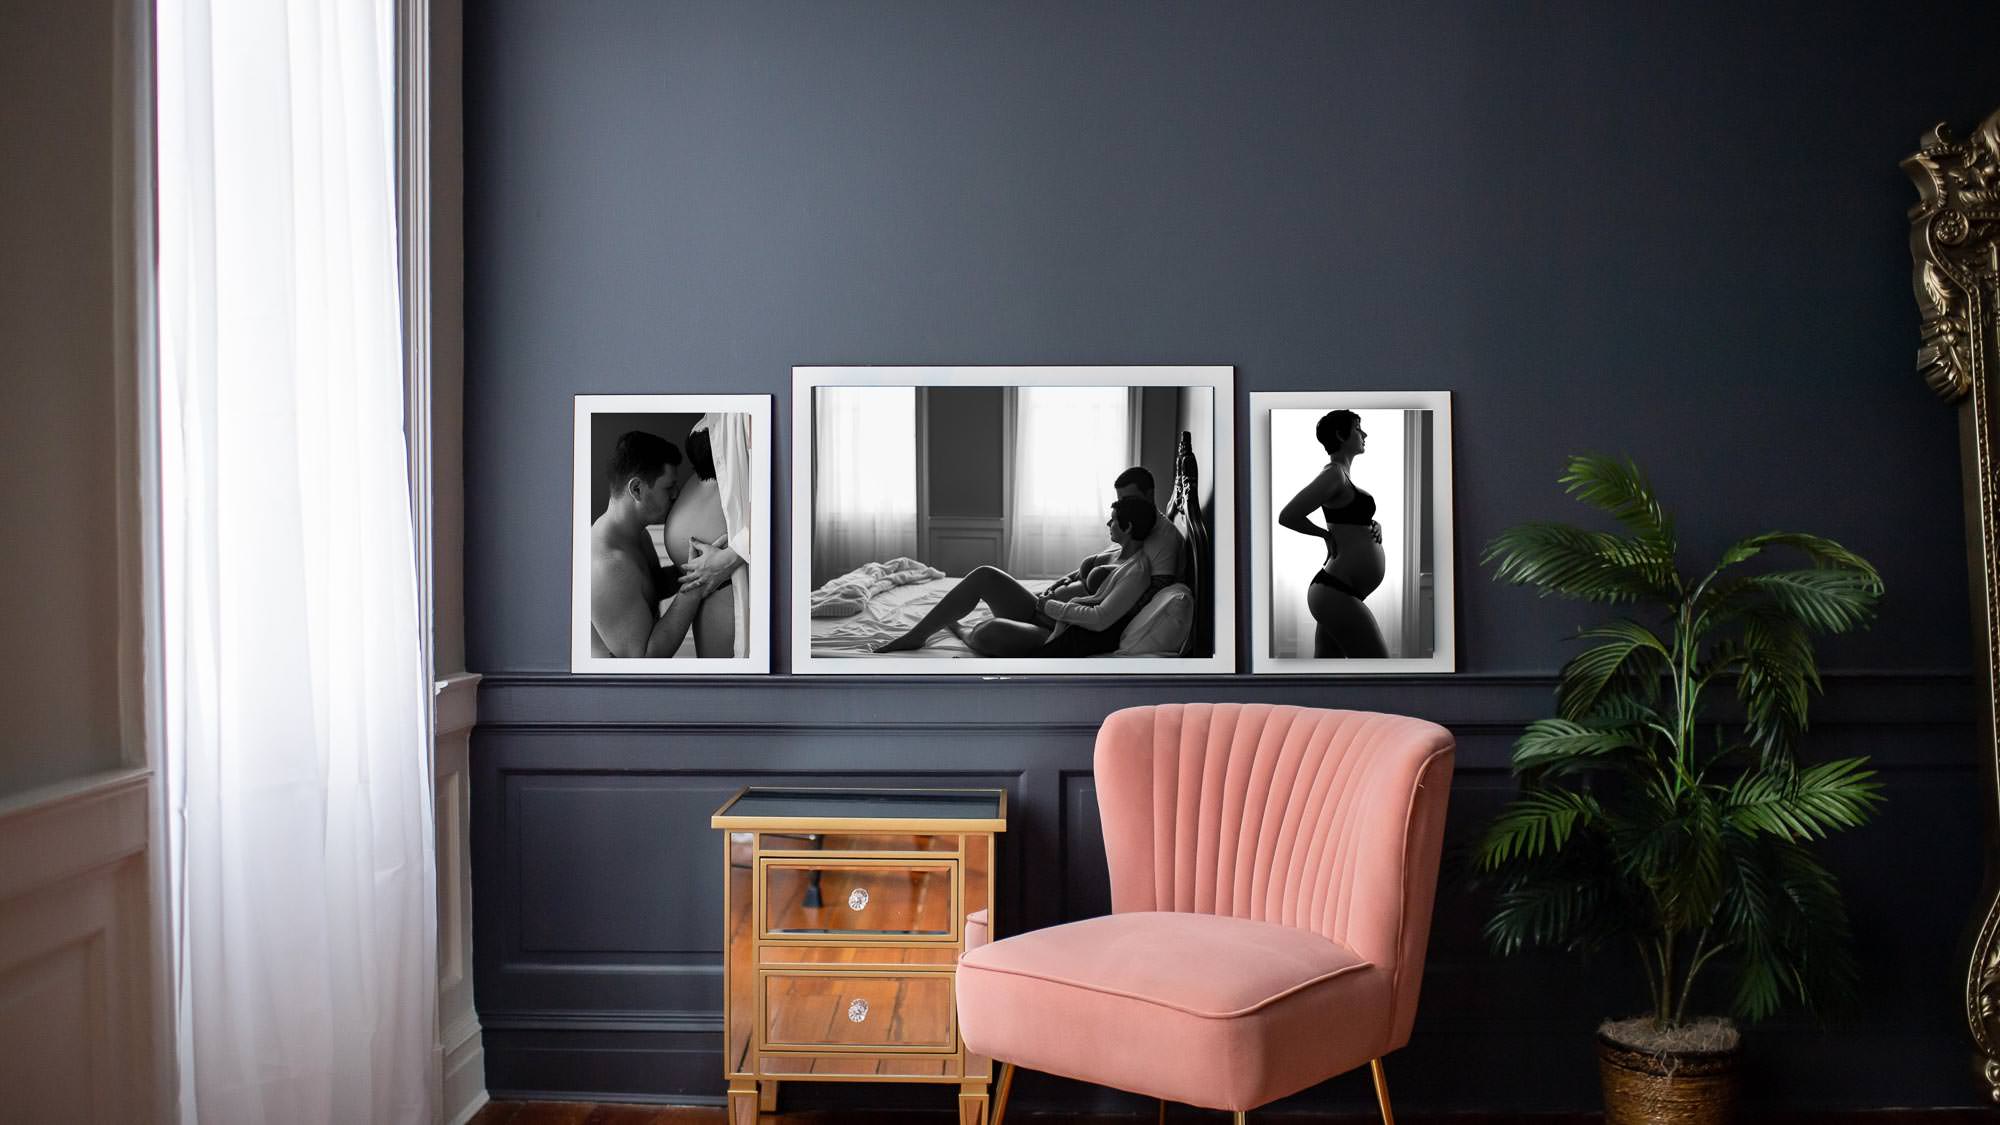 Boudoir products of three pictures hanging on a wall.